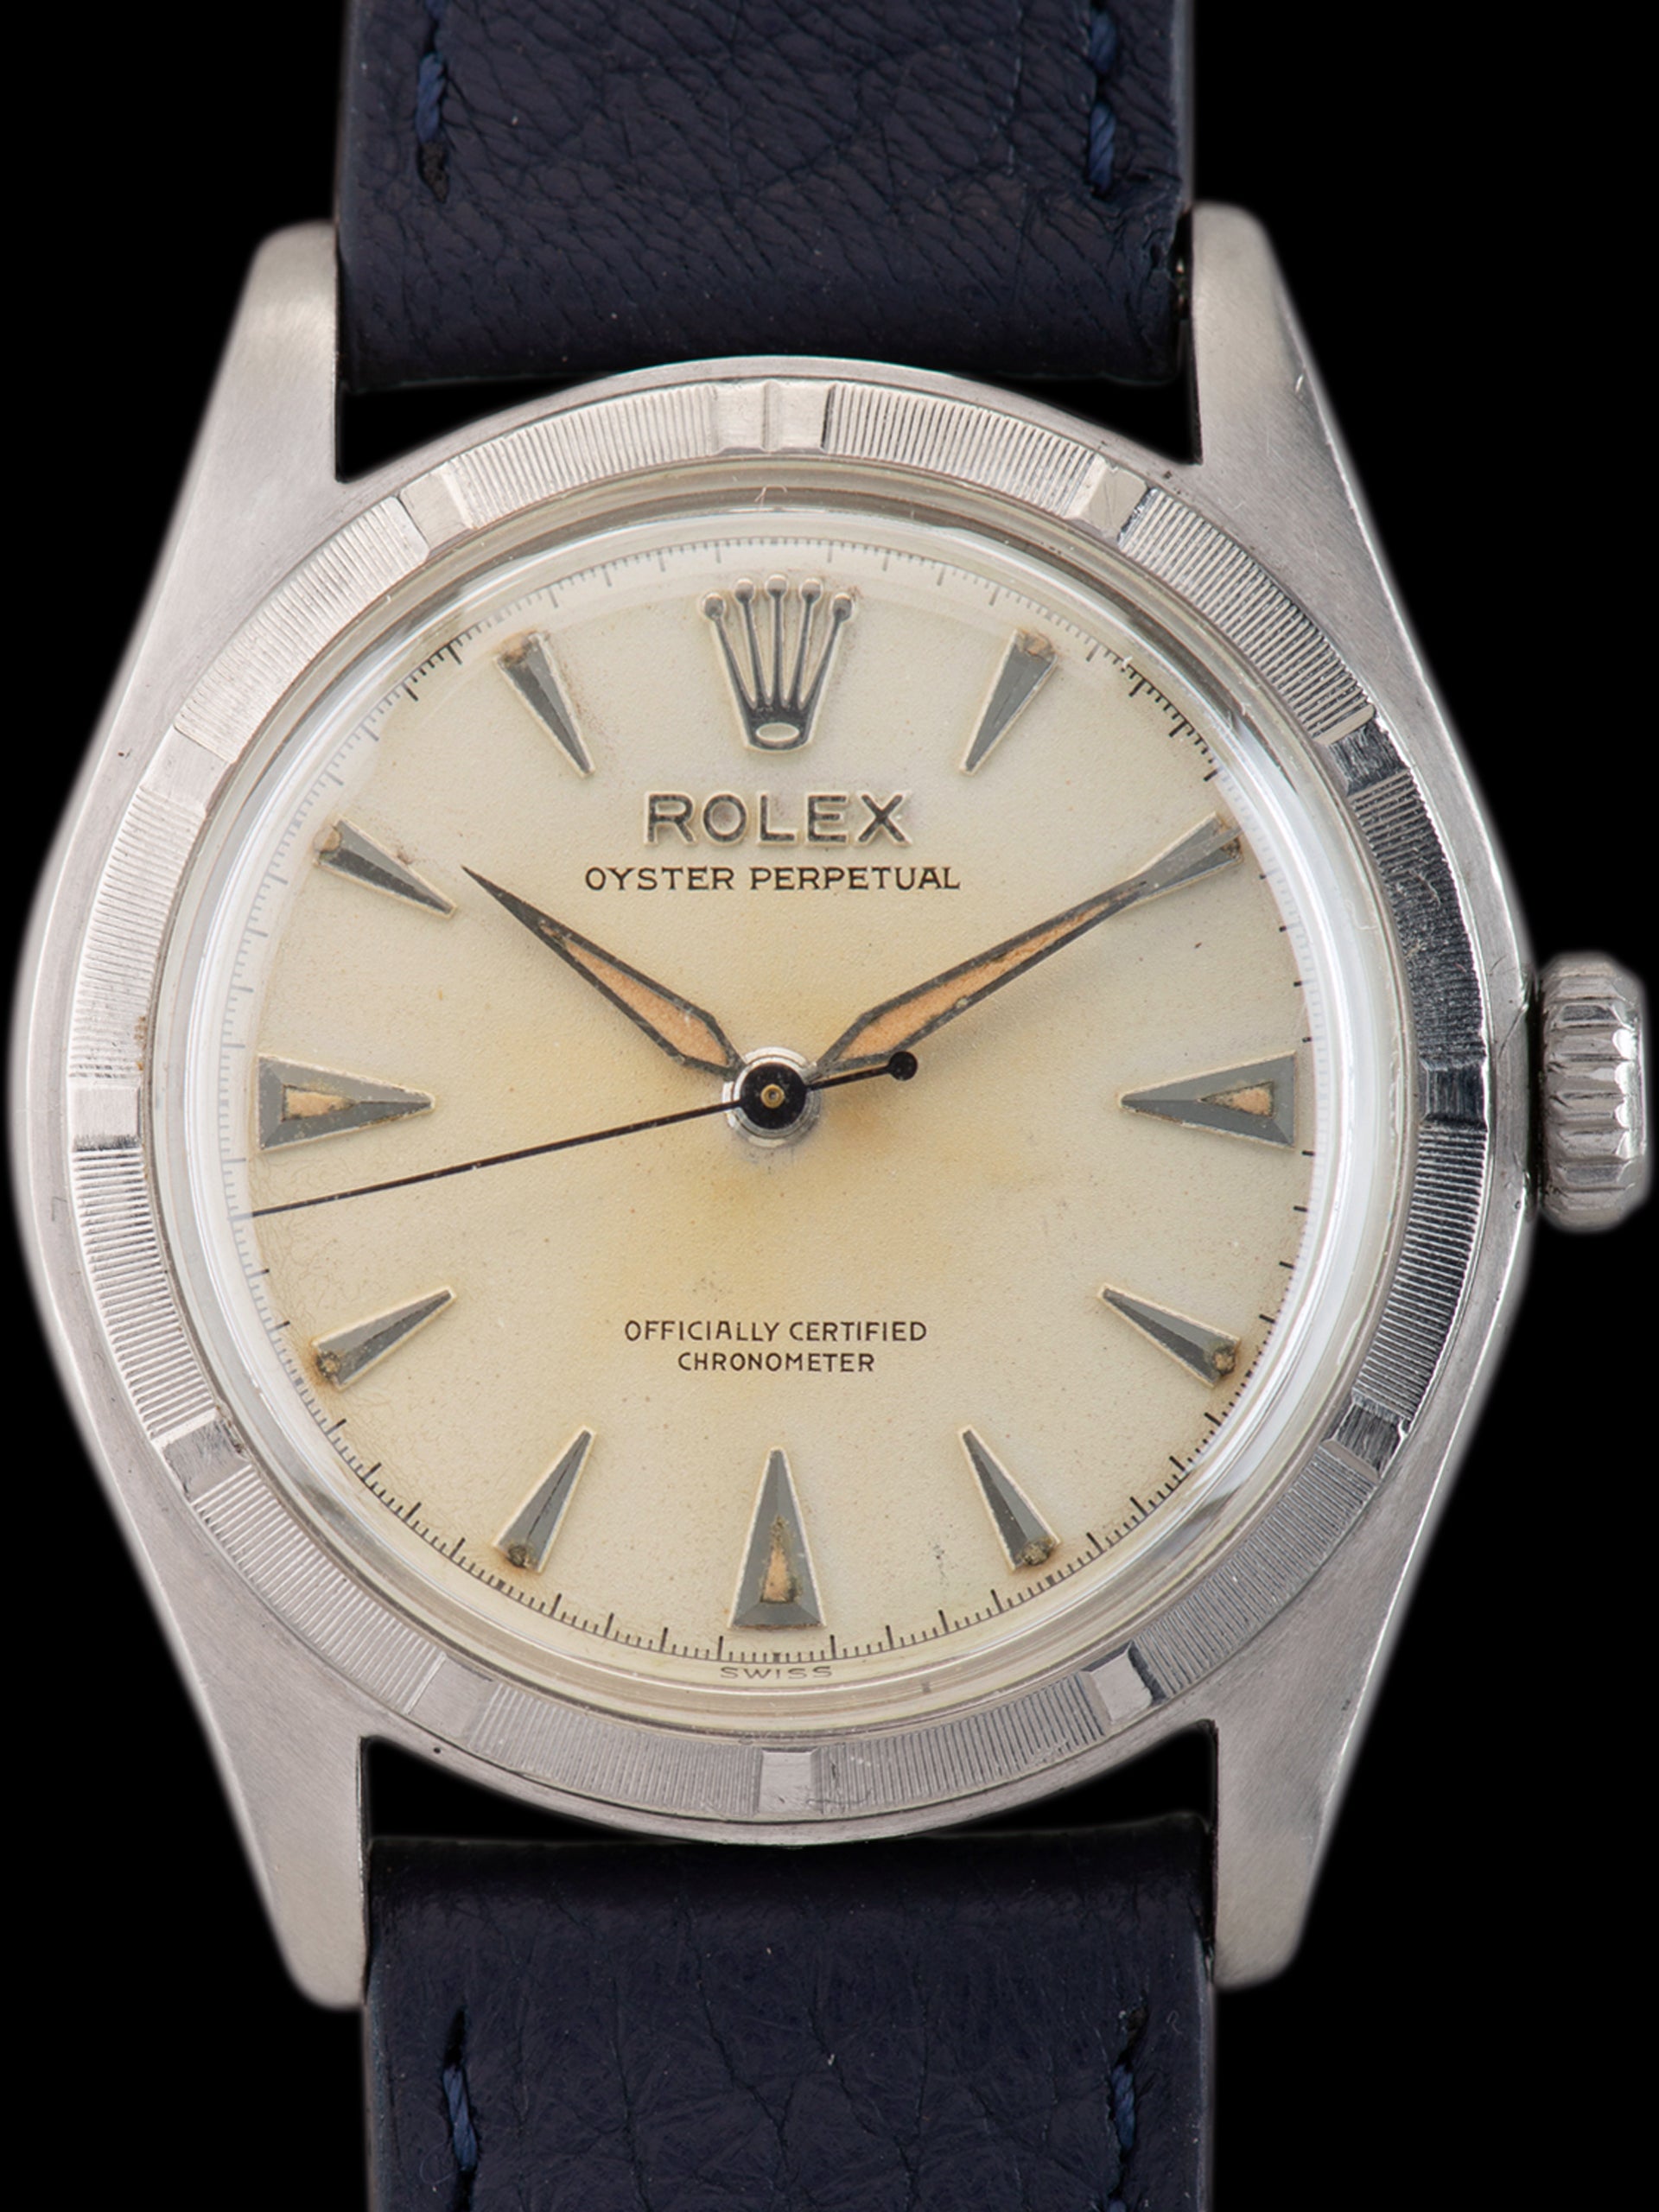 1952 Rolex Oyster-Perpetual (Ref. 6107) "Big Bubble Back"